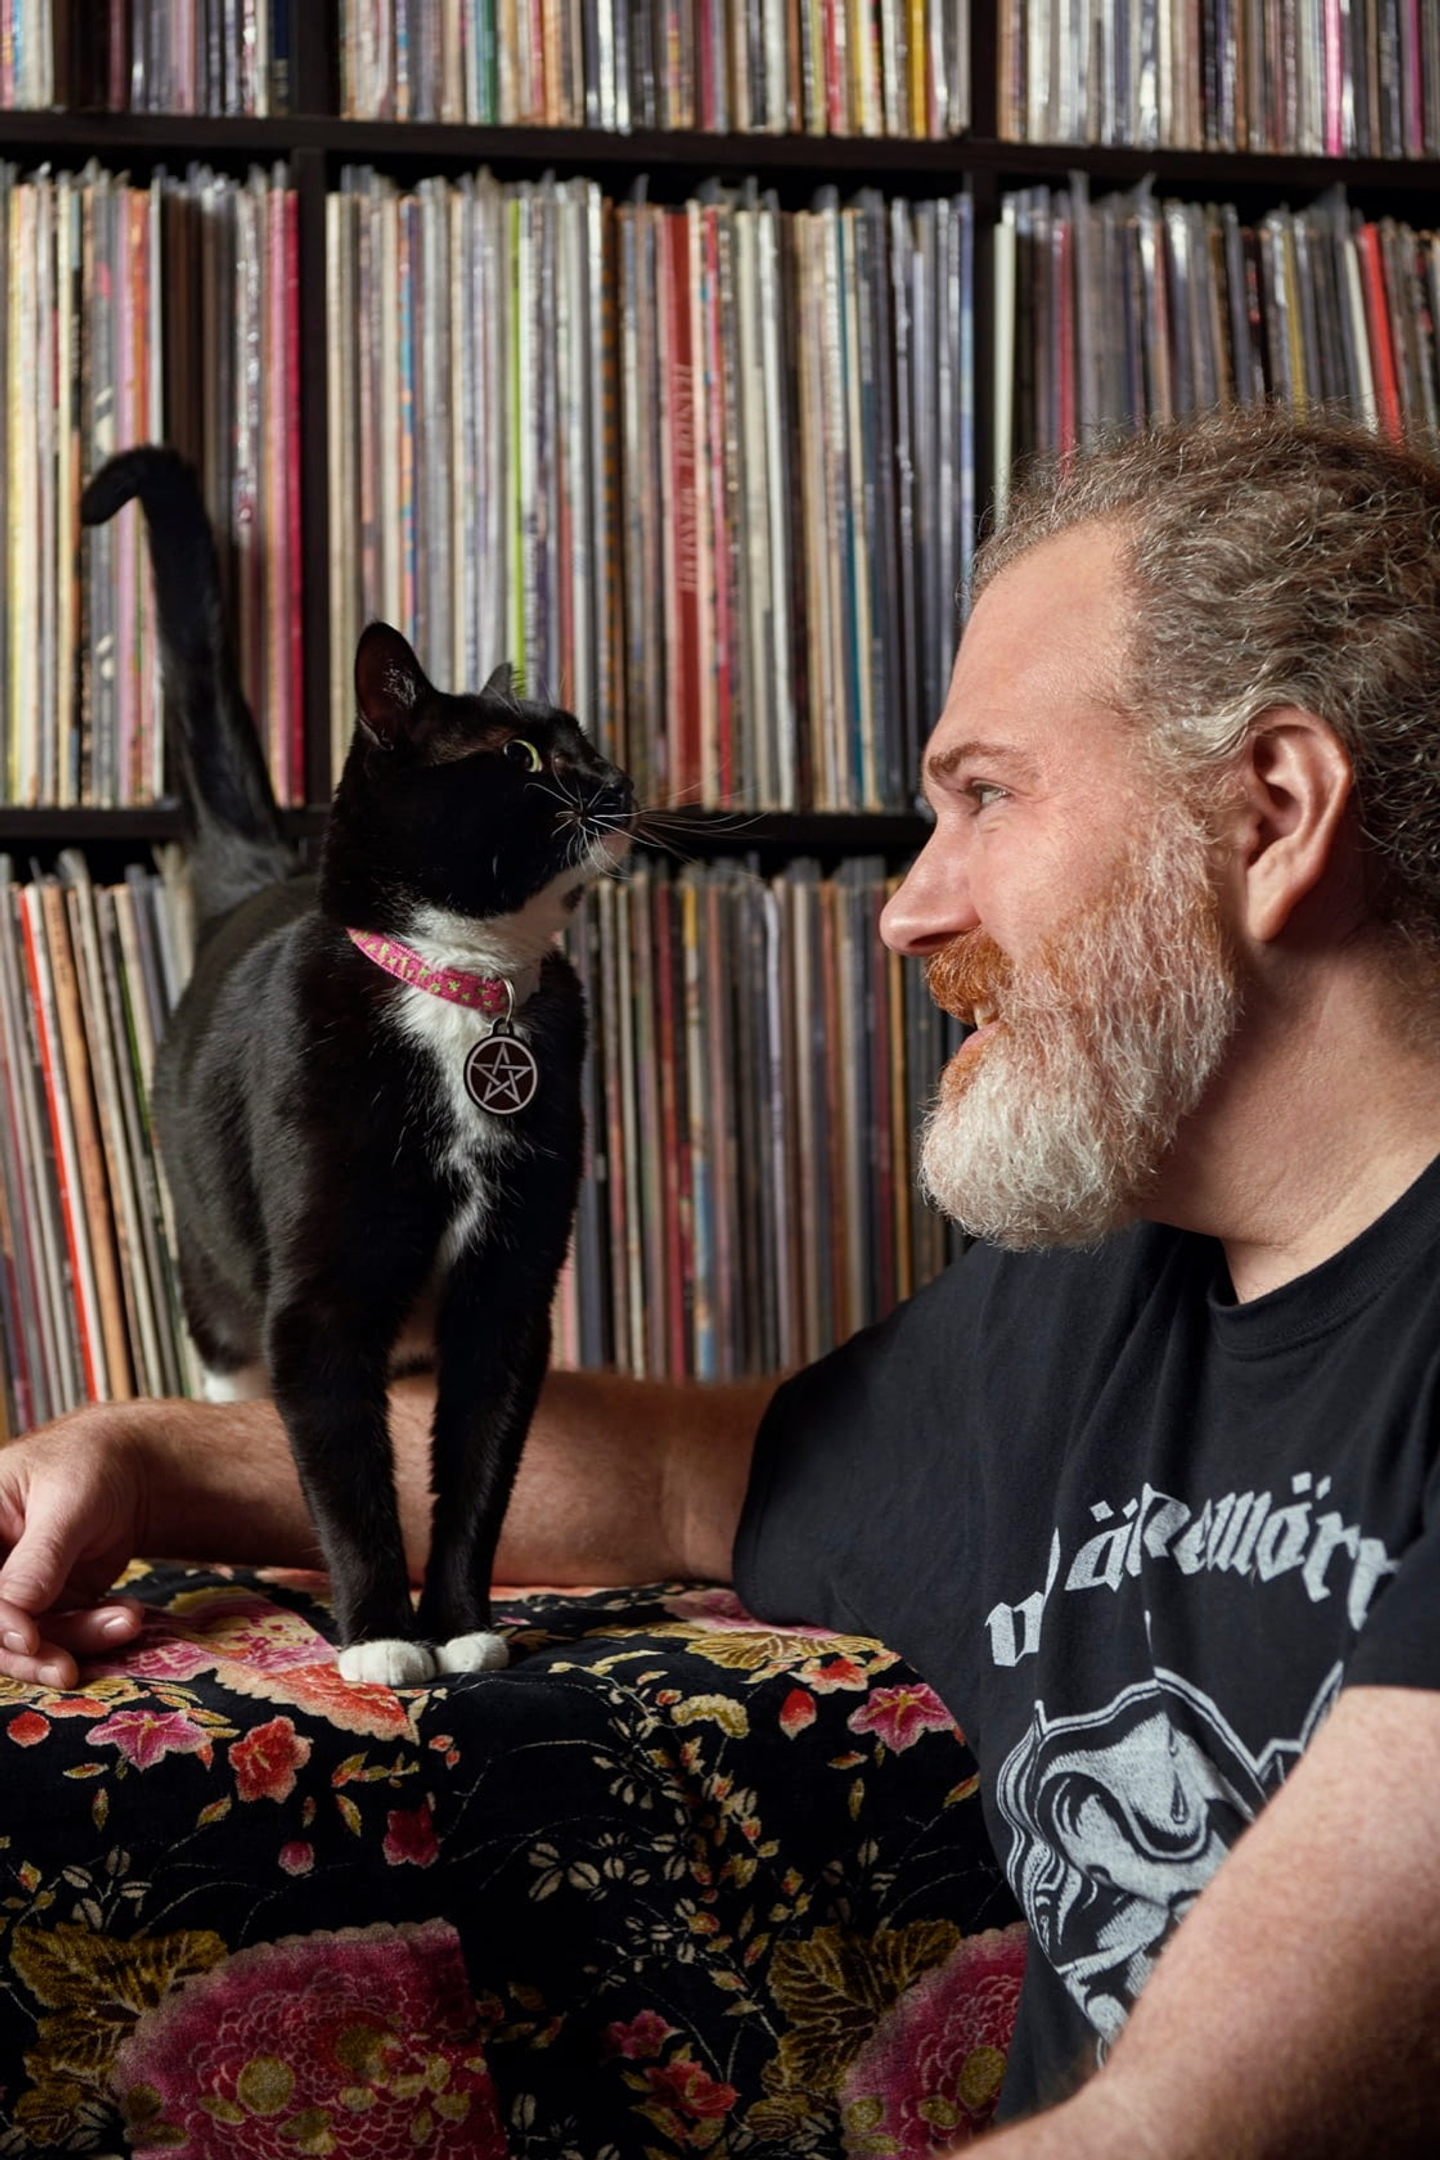 A man and his cat staring at each other lovingly in front of an expansive record collection